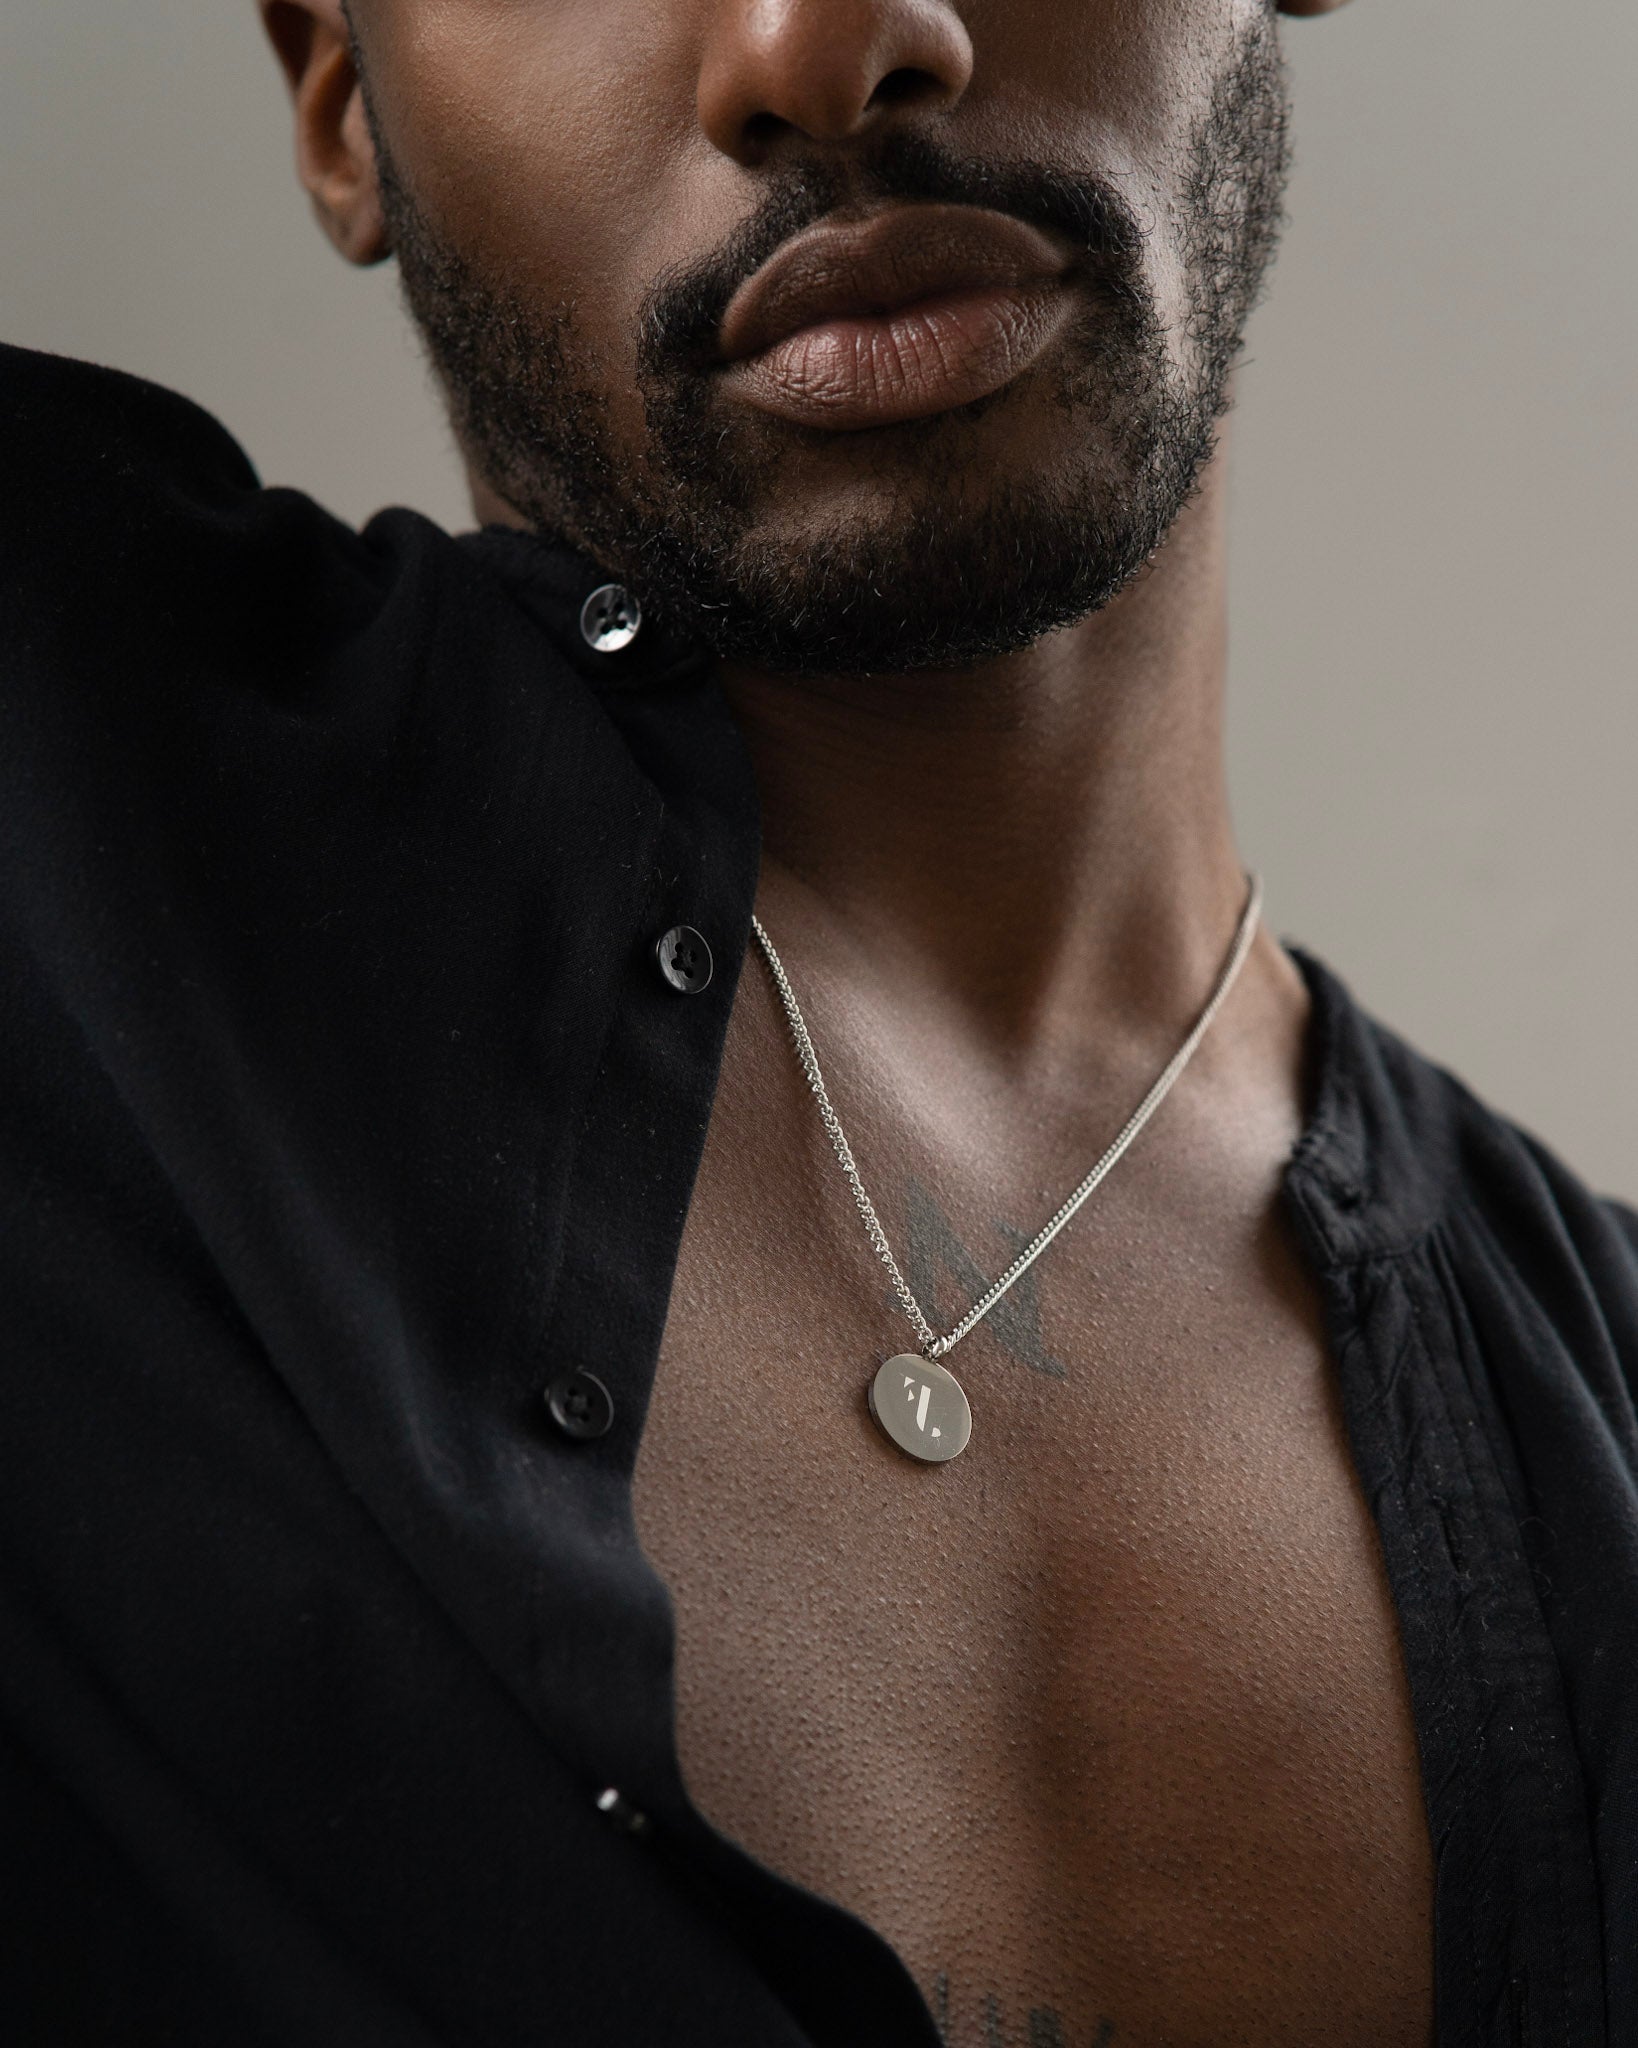 FJ Watches Five jwlry jewelry bijou jewel pendant pendentif cuban link maillon cubain necklace collier acier inoxydable stainless steel round oval rond cercle engraved gravé men homme silver argent montreal canada design water proof resistant eau chain chaine thin